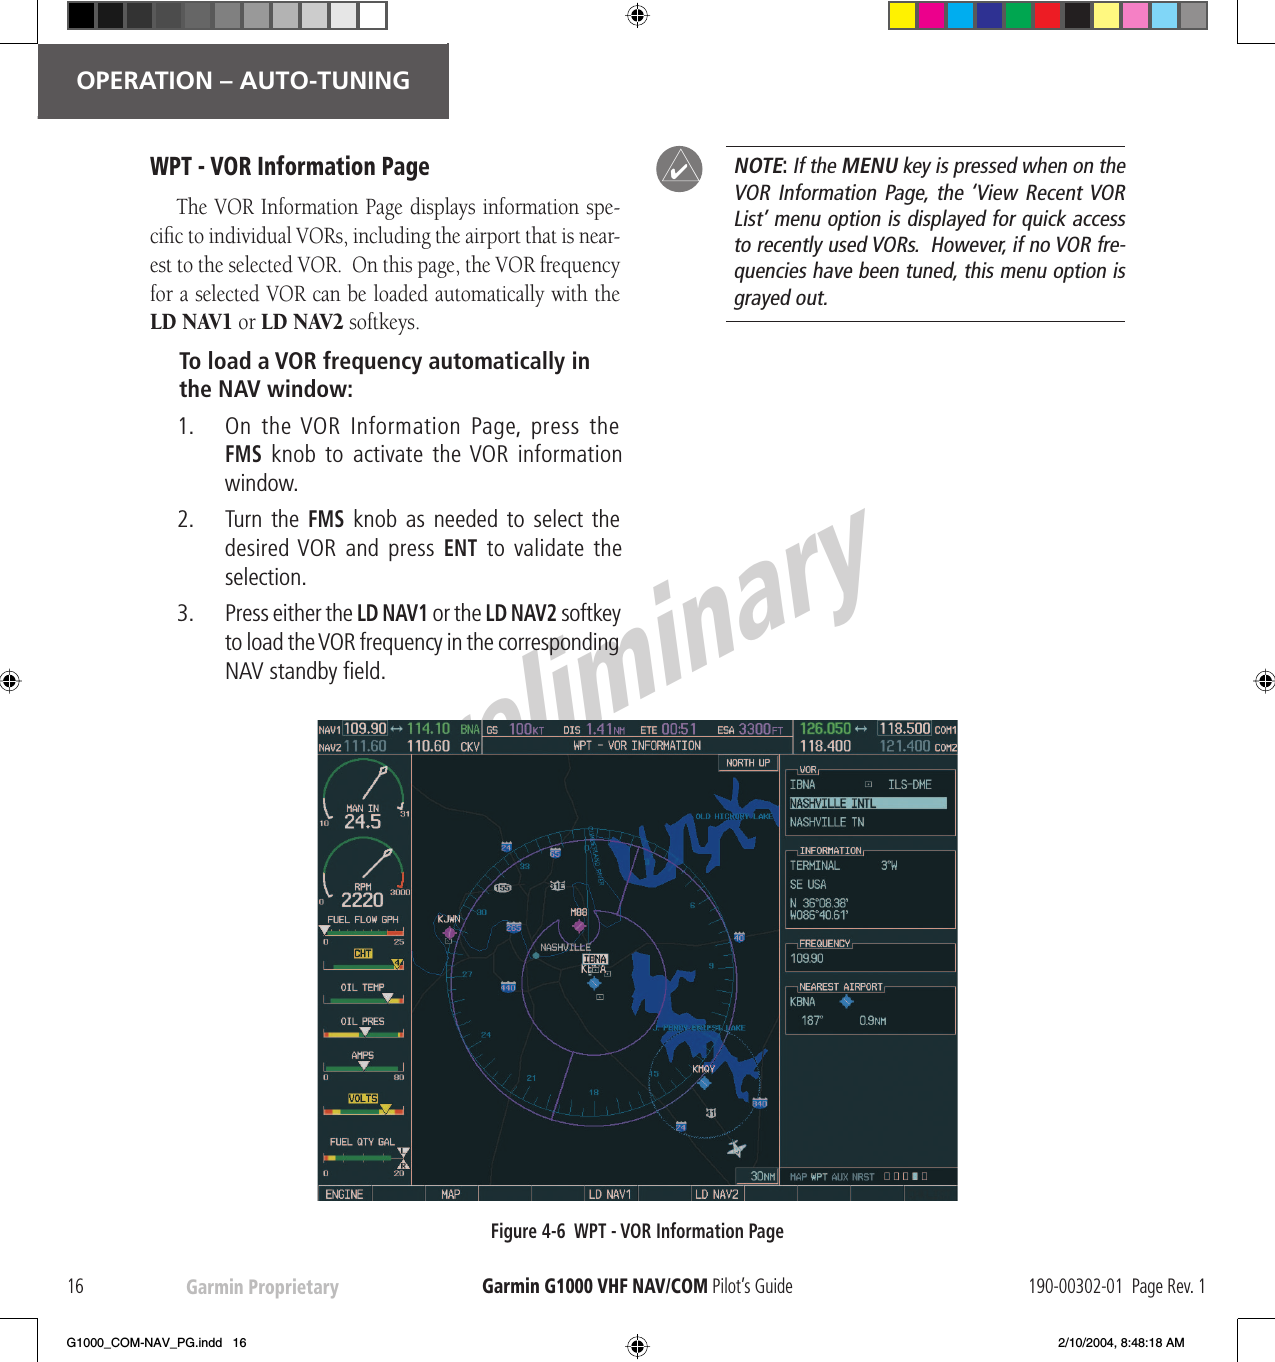 PreliminaryGarmin Proprietary16OPERATION – AUTO-TUNINGGarmin G1000  VHF NAV/COM Pilot’s Guide 190-00302-01  Page Rev. 1WPT -   VOR Information PageThe   VOR Information Page displays information spe-ciﬁ c to individual VORs, including the airport that is near-est to the selected  VOR.  On this page, the  VOR frequency for a selected  VOR can be loaded automatically with the  LD NAV1 or  LD NAV2 softkeys.To load a  VOR frequency automatically in the NAV window:1.     On  the   VOR  Information  Page,  press  the  FMS knob to activate the  VOR information window.2.     Turn  the   FMS knob as needed to select the desired  VOR and press ENT to validate the selection.3.     Press either the  LD NAV1 or the  LD NAV2 softkey to load the  VOR frequency in the corresponding NAV  standby ﬁ eld.NOTE: If the  MENU key is pressed when on the VOR Information Page, the ‘View Recent  VOR List’ menu option is displayed for quick access to  recently used VORs.  However, if no VOR fre-quencies have been tuned, this menu option is grayed out.Figure 4-6  WPT -   VOR Information Page!G1000_COM-NAV_PG.indd   16 2/10/2004, 8:48:18 AM